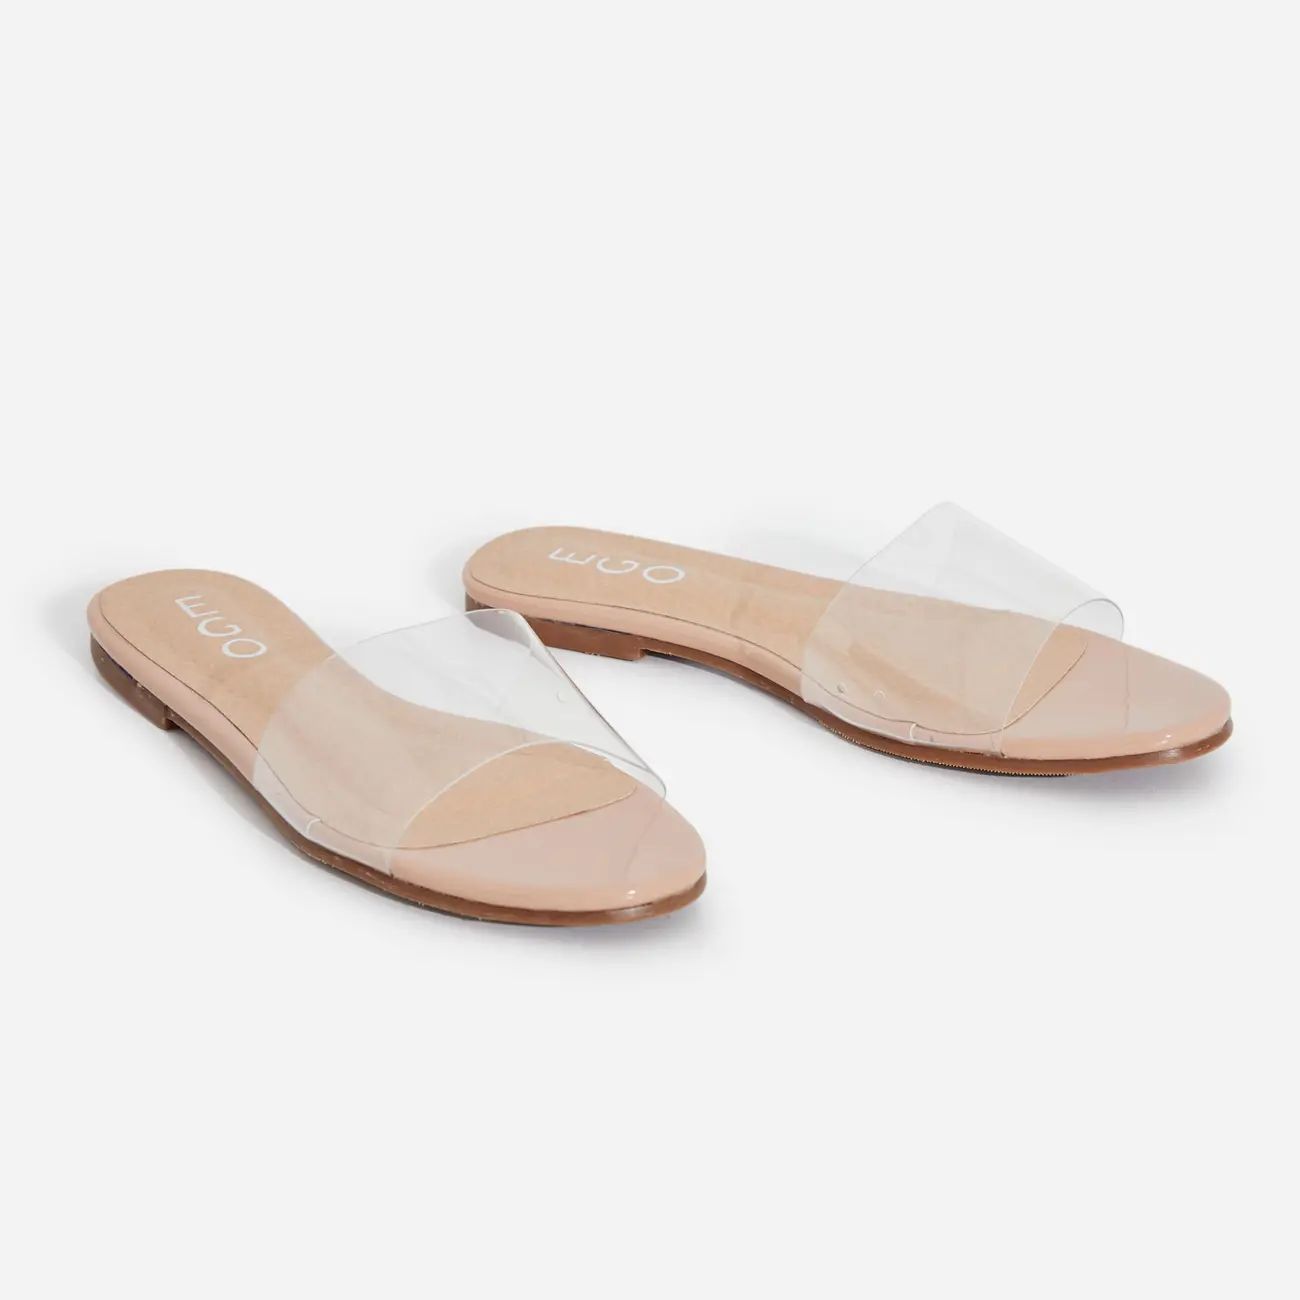 Kerrie Clear Perspex Sandal In Nude Patent | EGO Shoes (US & Canada)